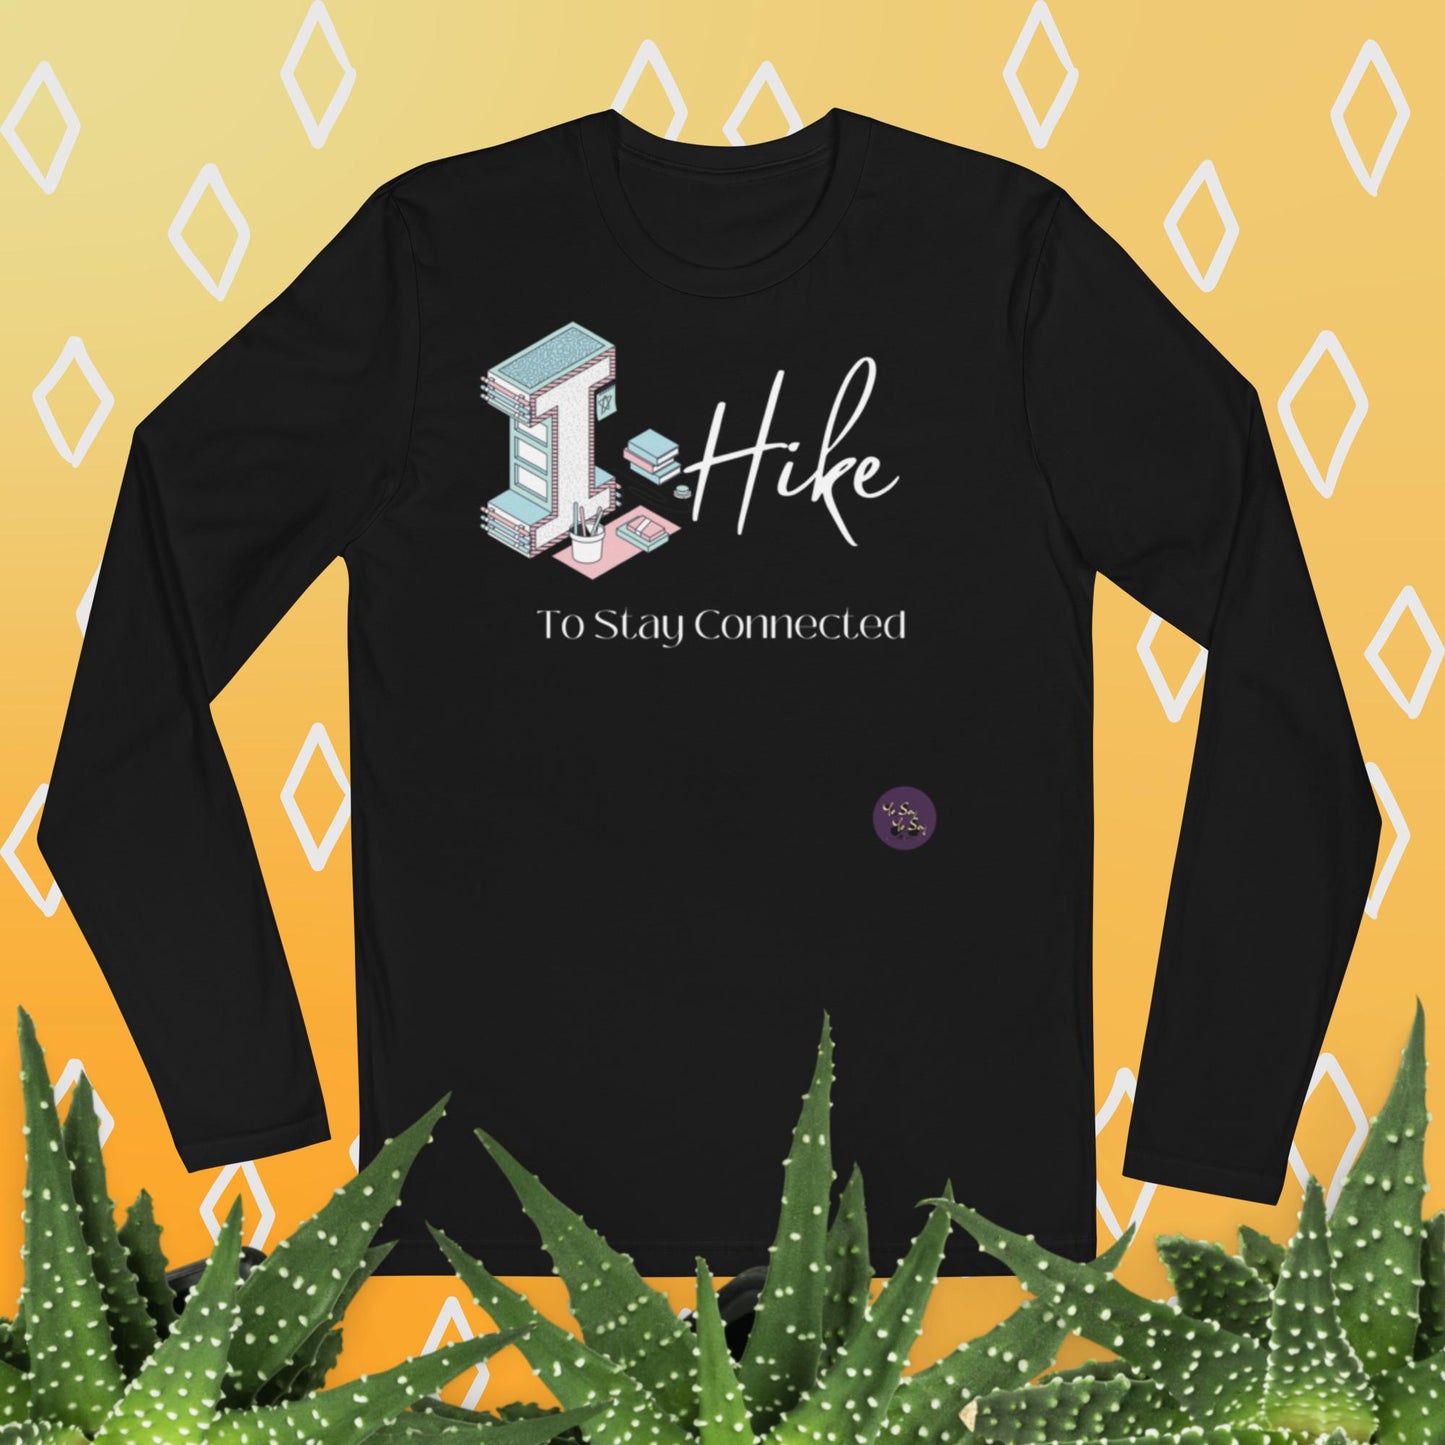 Connect with Nature with Solenspiration: 'iHike To Stay Connected'